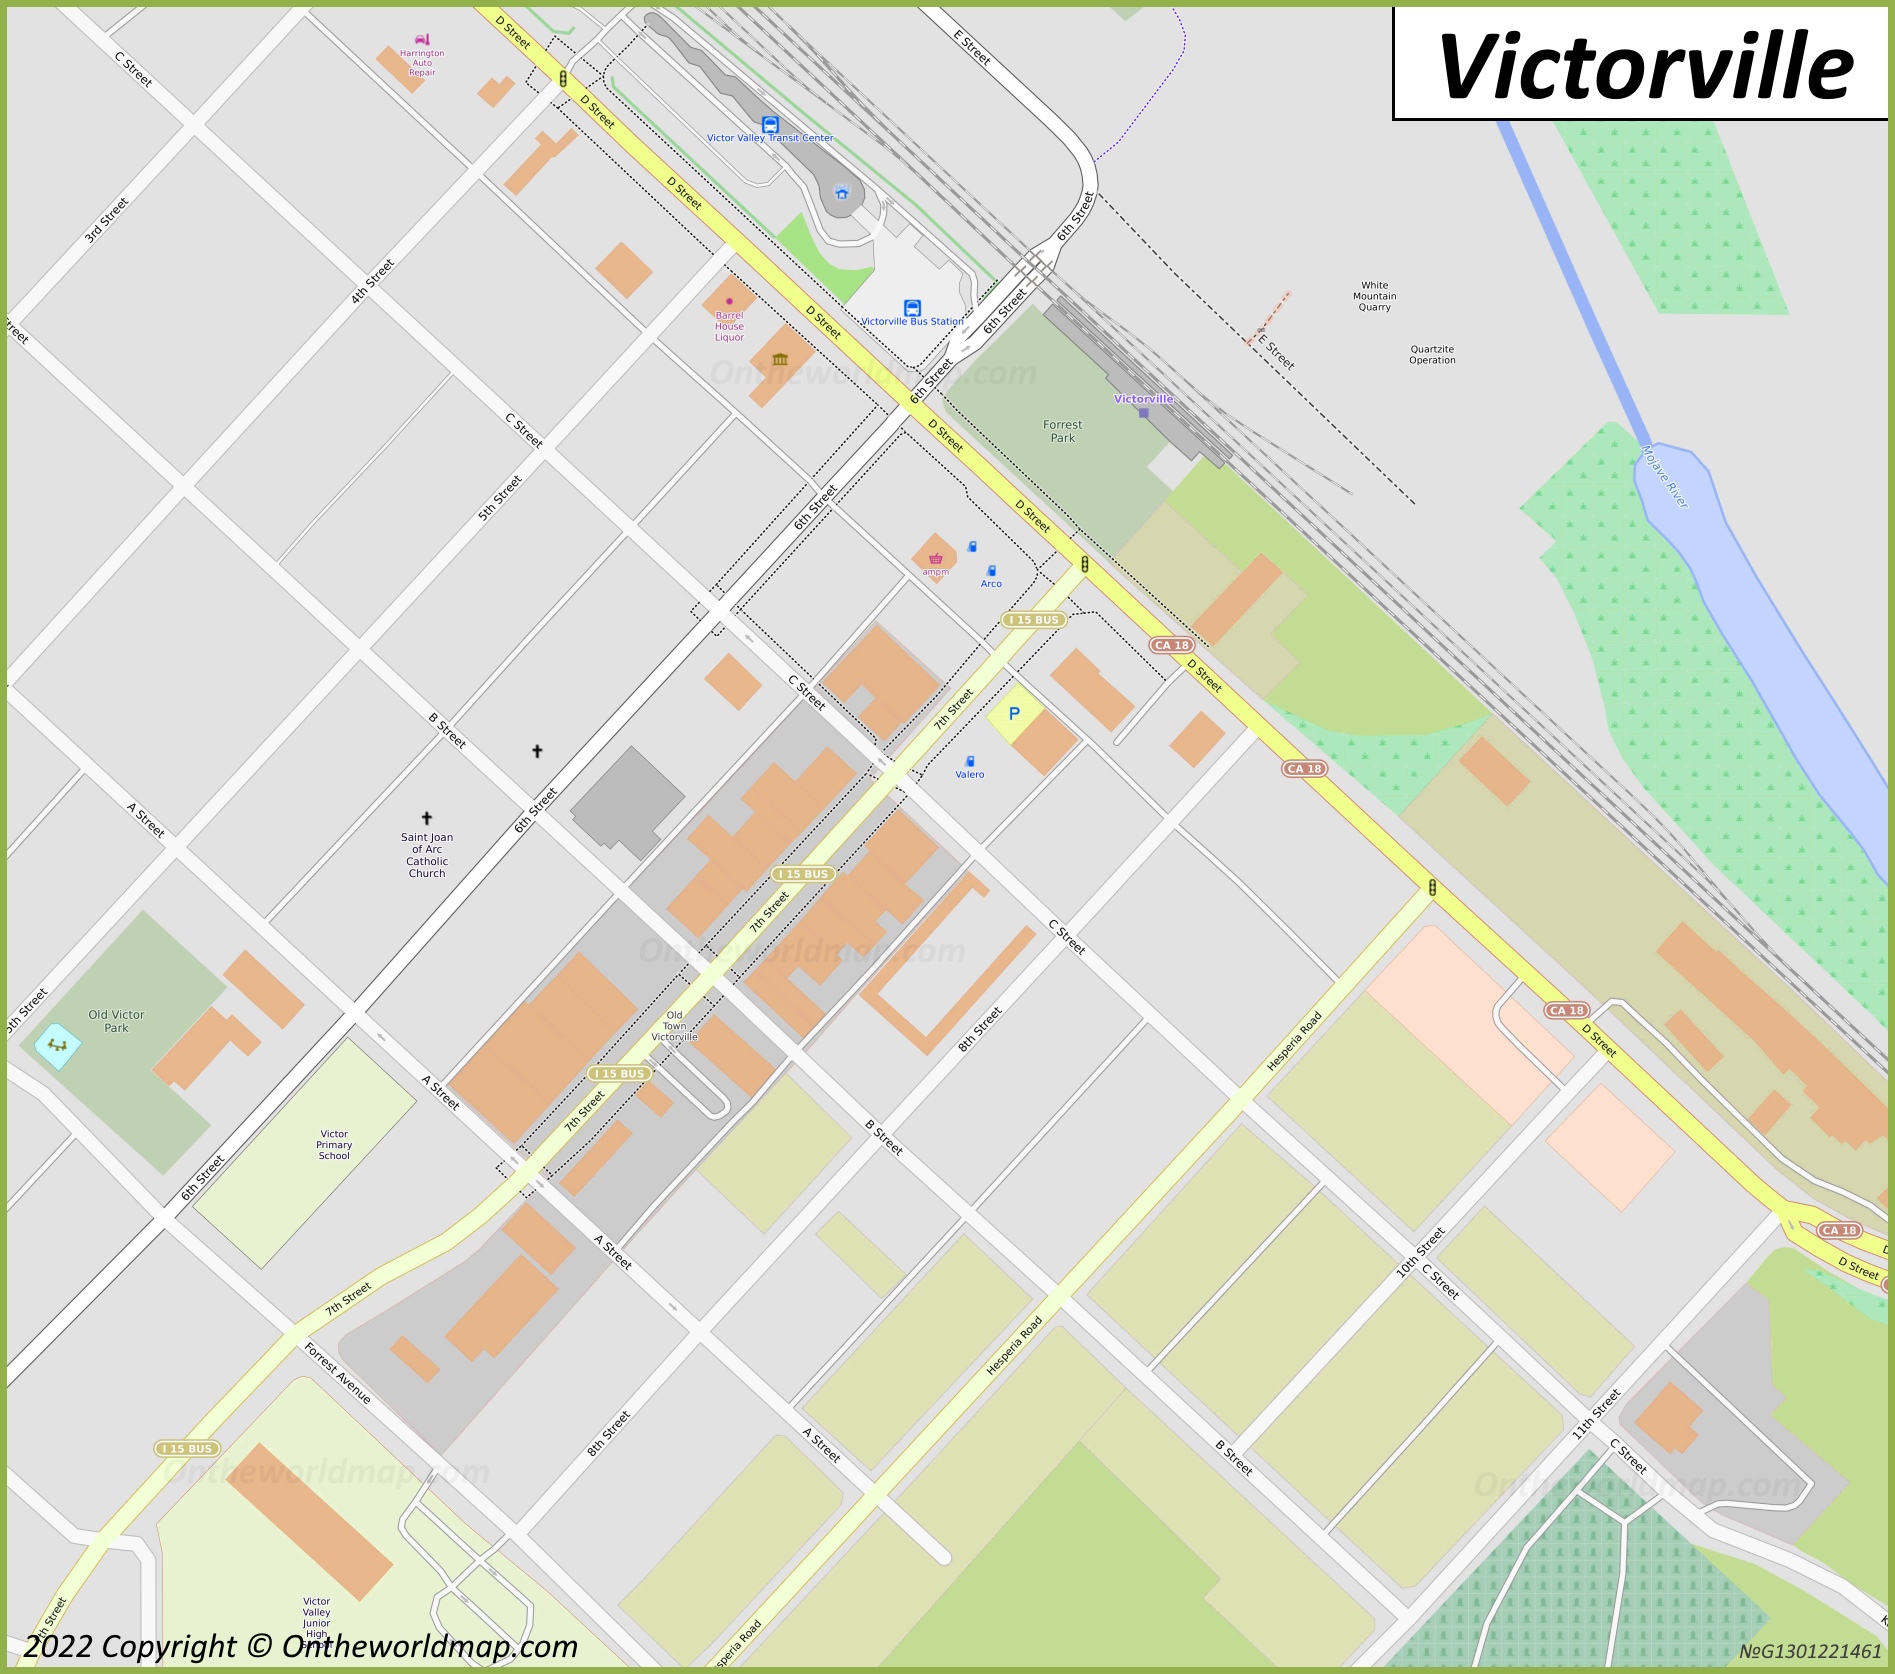 Victorville Old Town Map